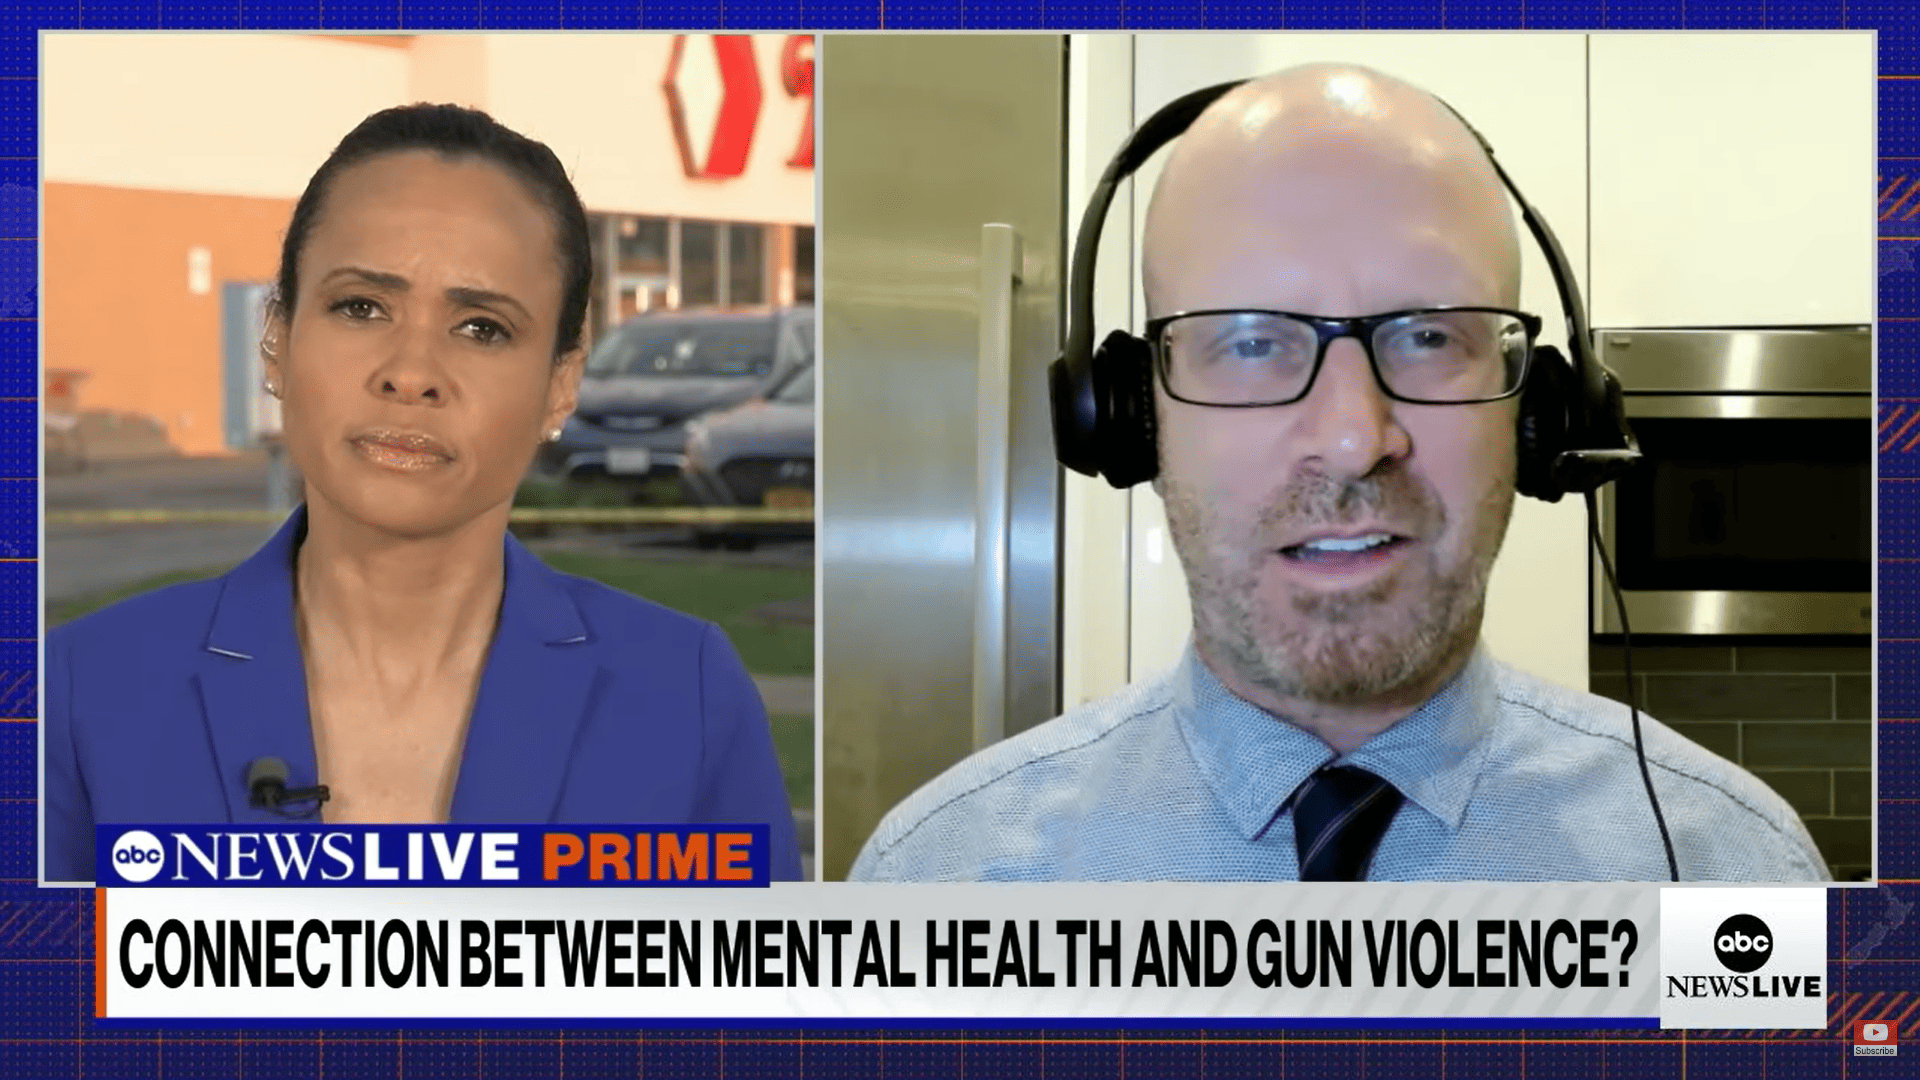 Mental health “1 piece of the puzzle”: Psychiatrist on Buffalo shooting